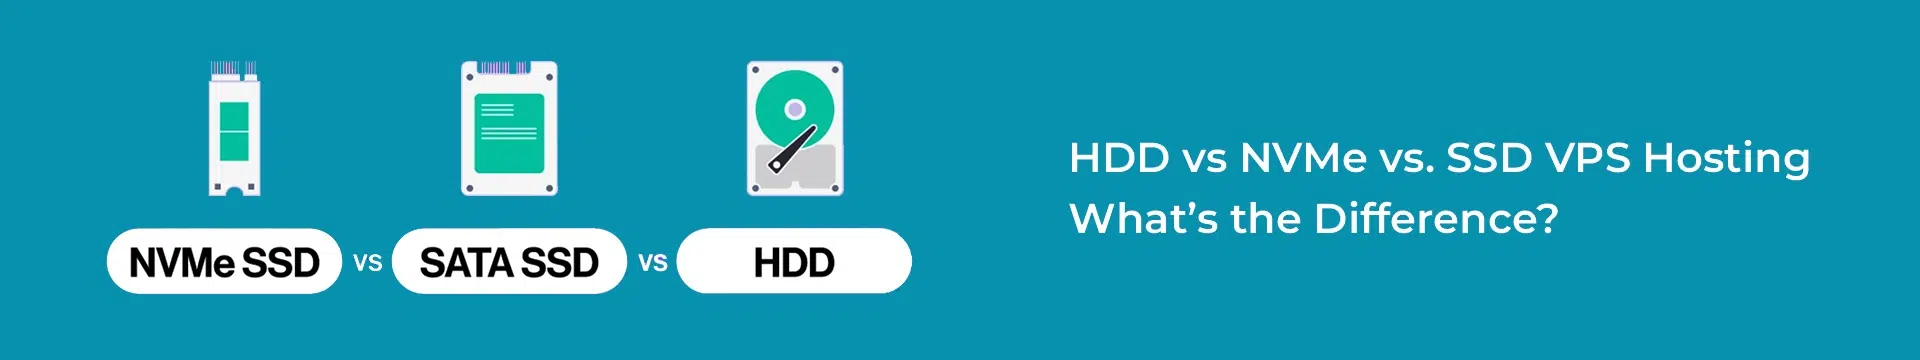 HDD vs. NVMe vs. SSD VPS Hosting: What’s the Difference?